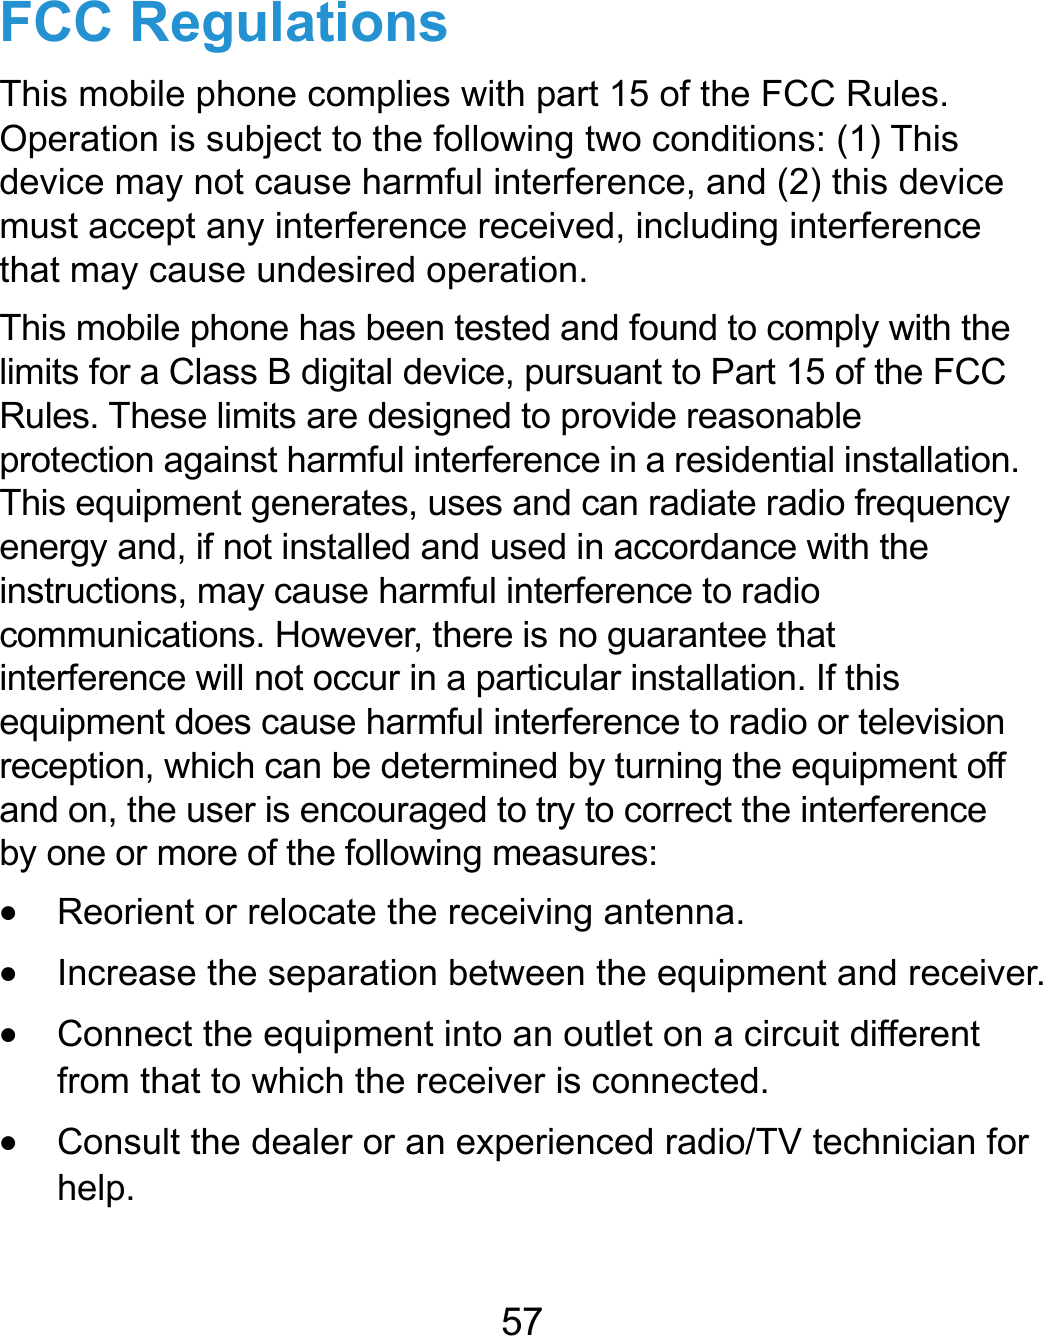  57 FCC Regulations This mobile phone complies with part 15 of the FCC Rules. Operation is subject to the following two conditions: (1) This device may not cause harmful interference, and (2) this device must accept any interference received, including interference that may cause undesired operation. This mobile phone has been tested and found to comply with the limits for a Class B digital device, pursuant to Part 15 of the FCC Rules. These limits are designed to provide reasonable protection against harmful interference in a residential installation. This equipment generates, uses and can radiate radio frequency energy and, if not installed and used in accordance with the instructions, may cause harmful interference to radio communications. However, there is no guarantee that interference will not occur in a particular installation. If this equipment does cause harmful interference to radio or television reception, which can be determined by turning the equipment off and on, the user is encouraged to try to correct the interference by one or more of the following measures:  Reorient or relocate the receiving antenna.  Increase the separation between the equipment and receiver.  Connect the equipment into an outlet on a circuit different from that to which the receiver is connected.  Consult the dealer or an experienced radio/TV technician for help.  